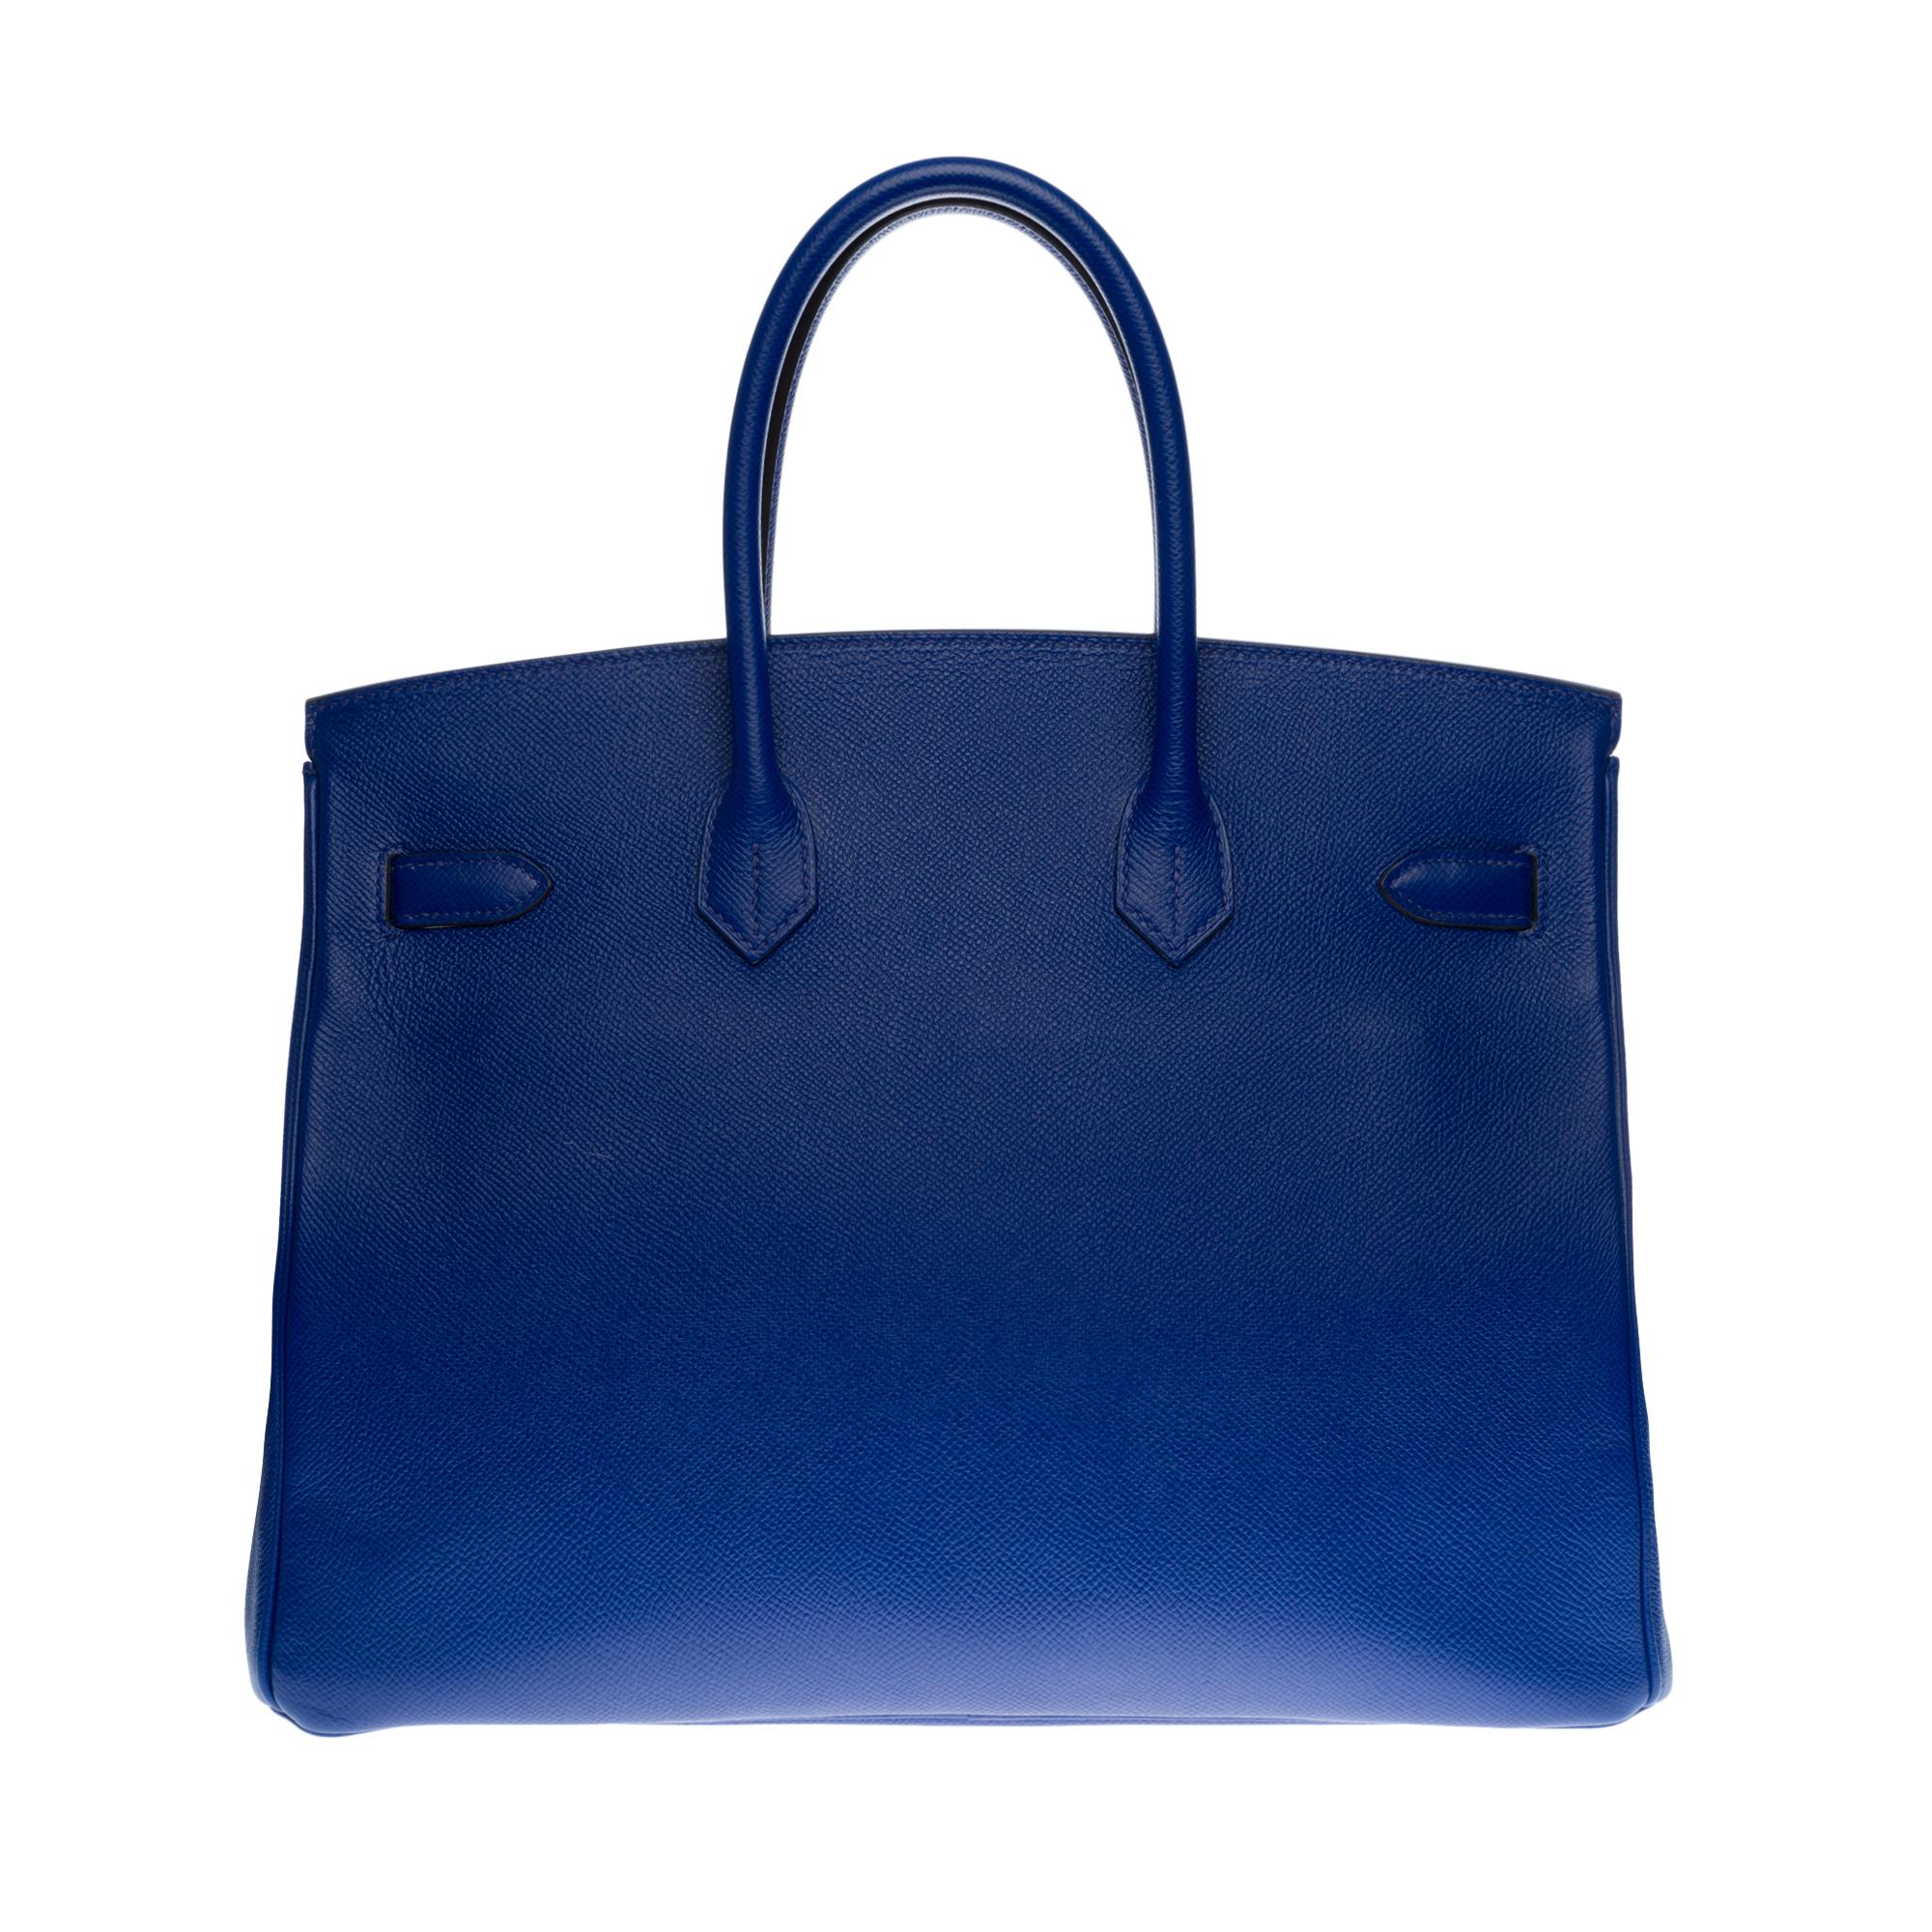 Beautiful Hermes Birkin 35 cm Epsom leather handbag in sapphire blue color, palladium silver metal hardware, double handle in blue leather allowing a handheld
Flap closure
Lining in blue leather, one zip pocket, one patch pocket
Signature: 